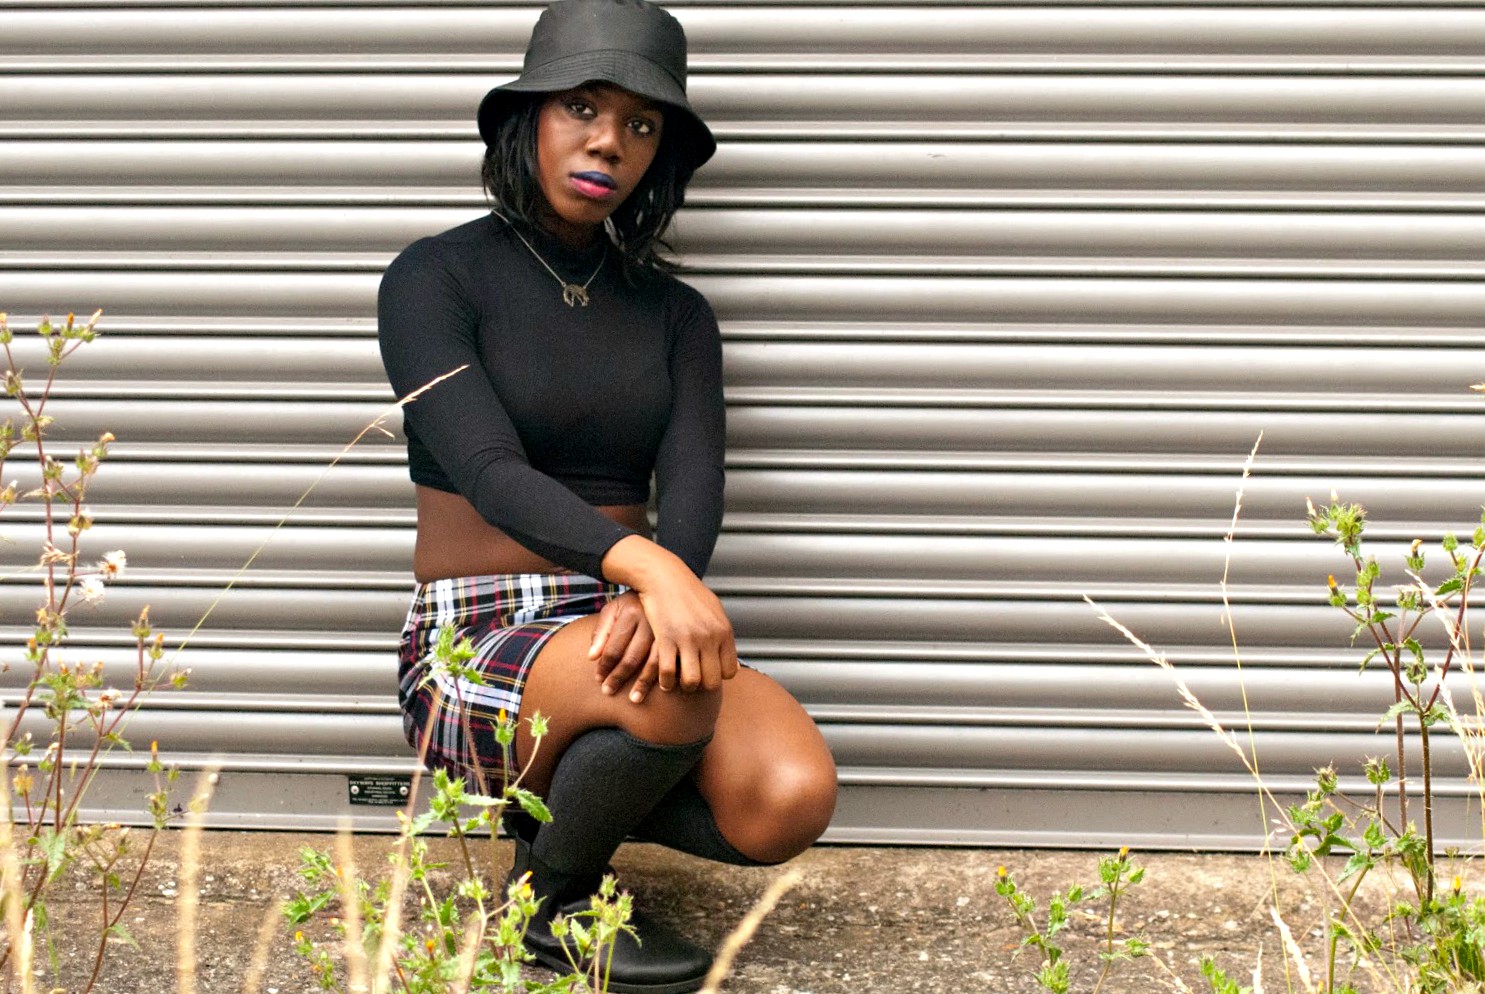 A Preppy 90's Boohoo Revival, Boohoo Skirt, Boohoo plaid skirt, 90's style, 90's fashion, bucket hat, Missguided ribbed crop top, 100 Ways to 30 UK fashion & lifestyle blog, fashion blogger, street style